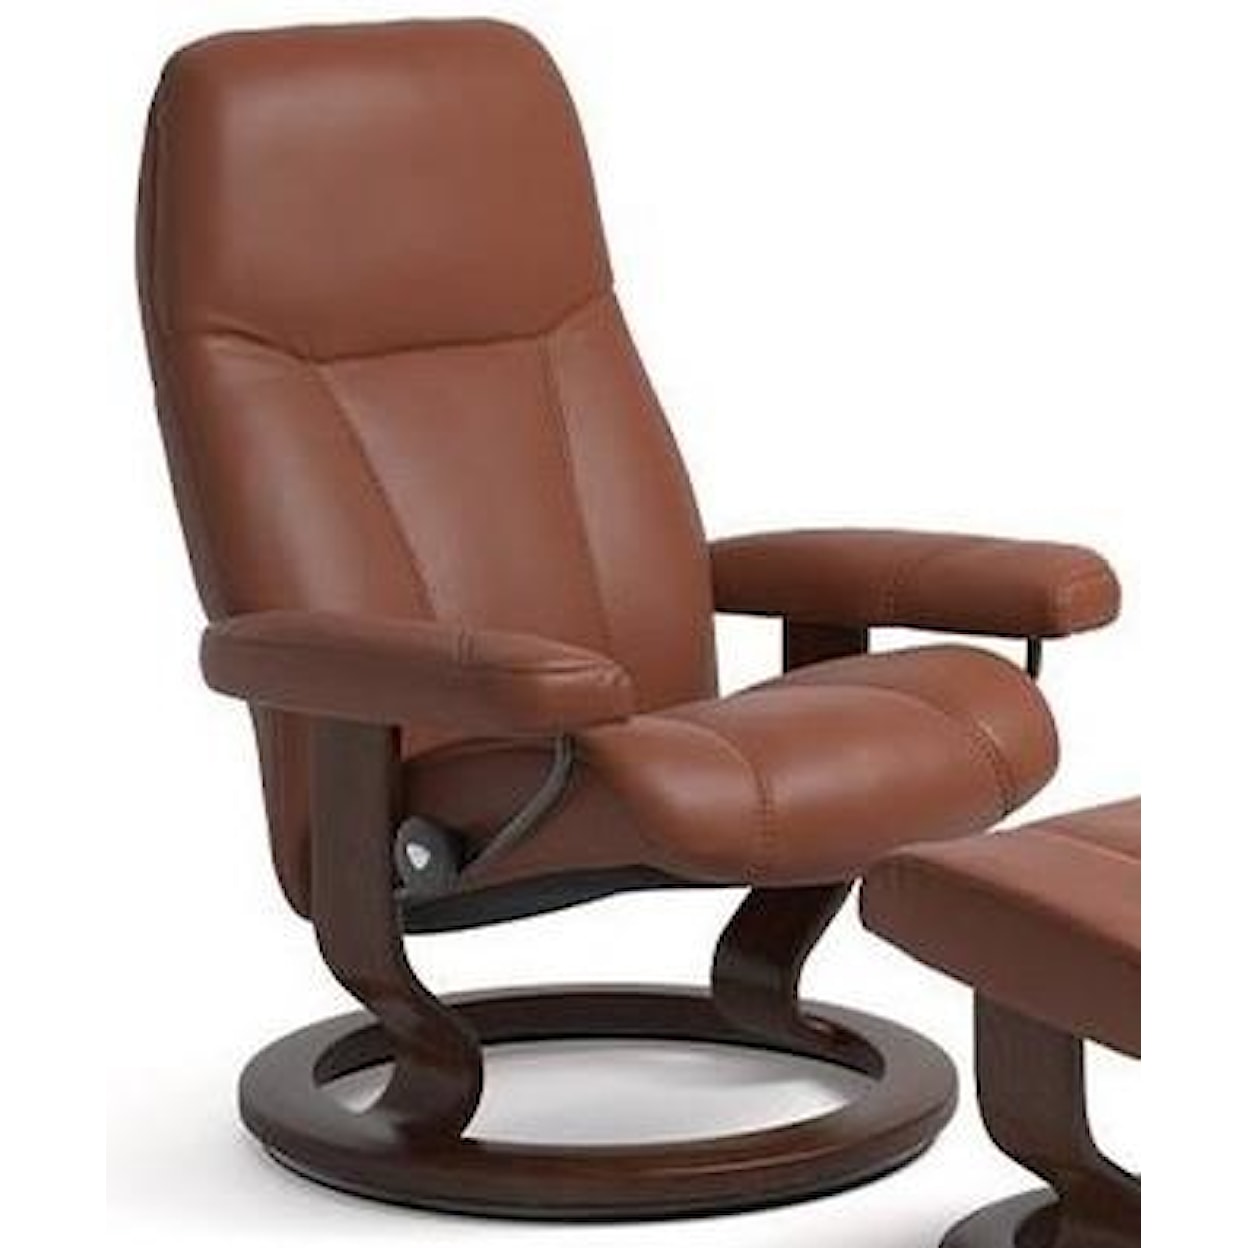 Stressless by Ekornes Consul Medium Reclining Chair with Classic Base